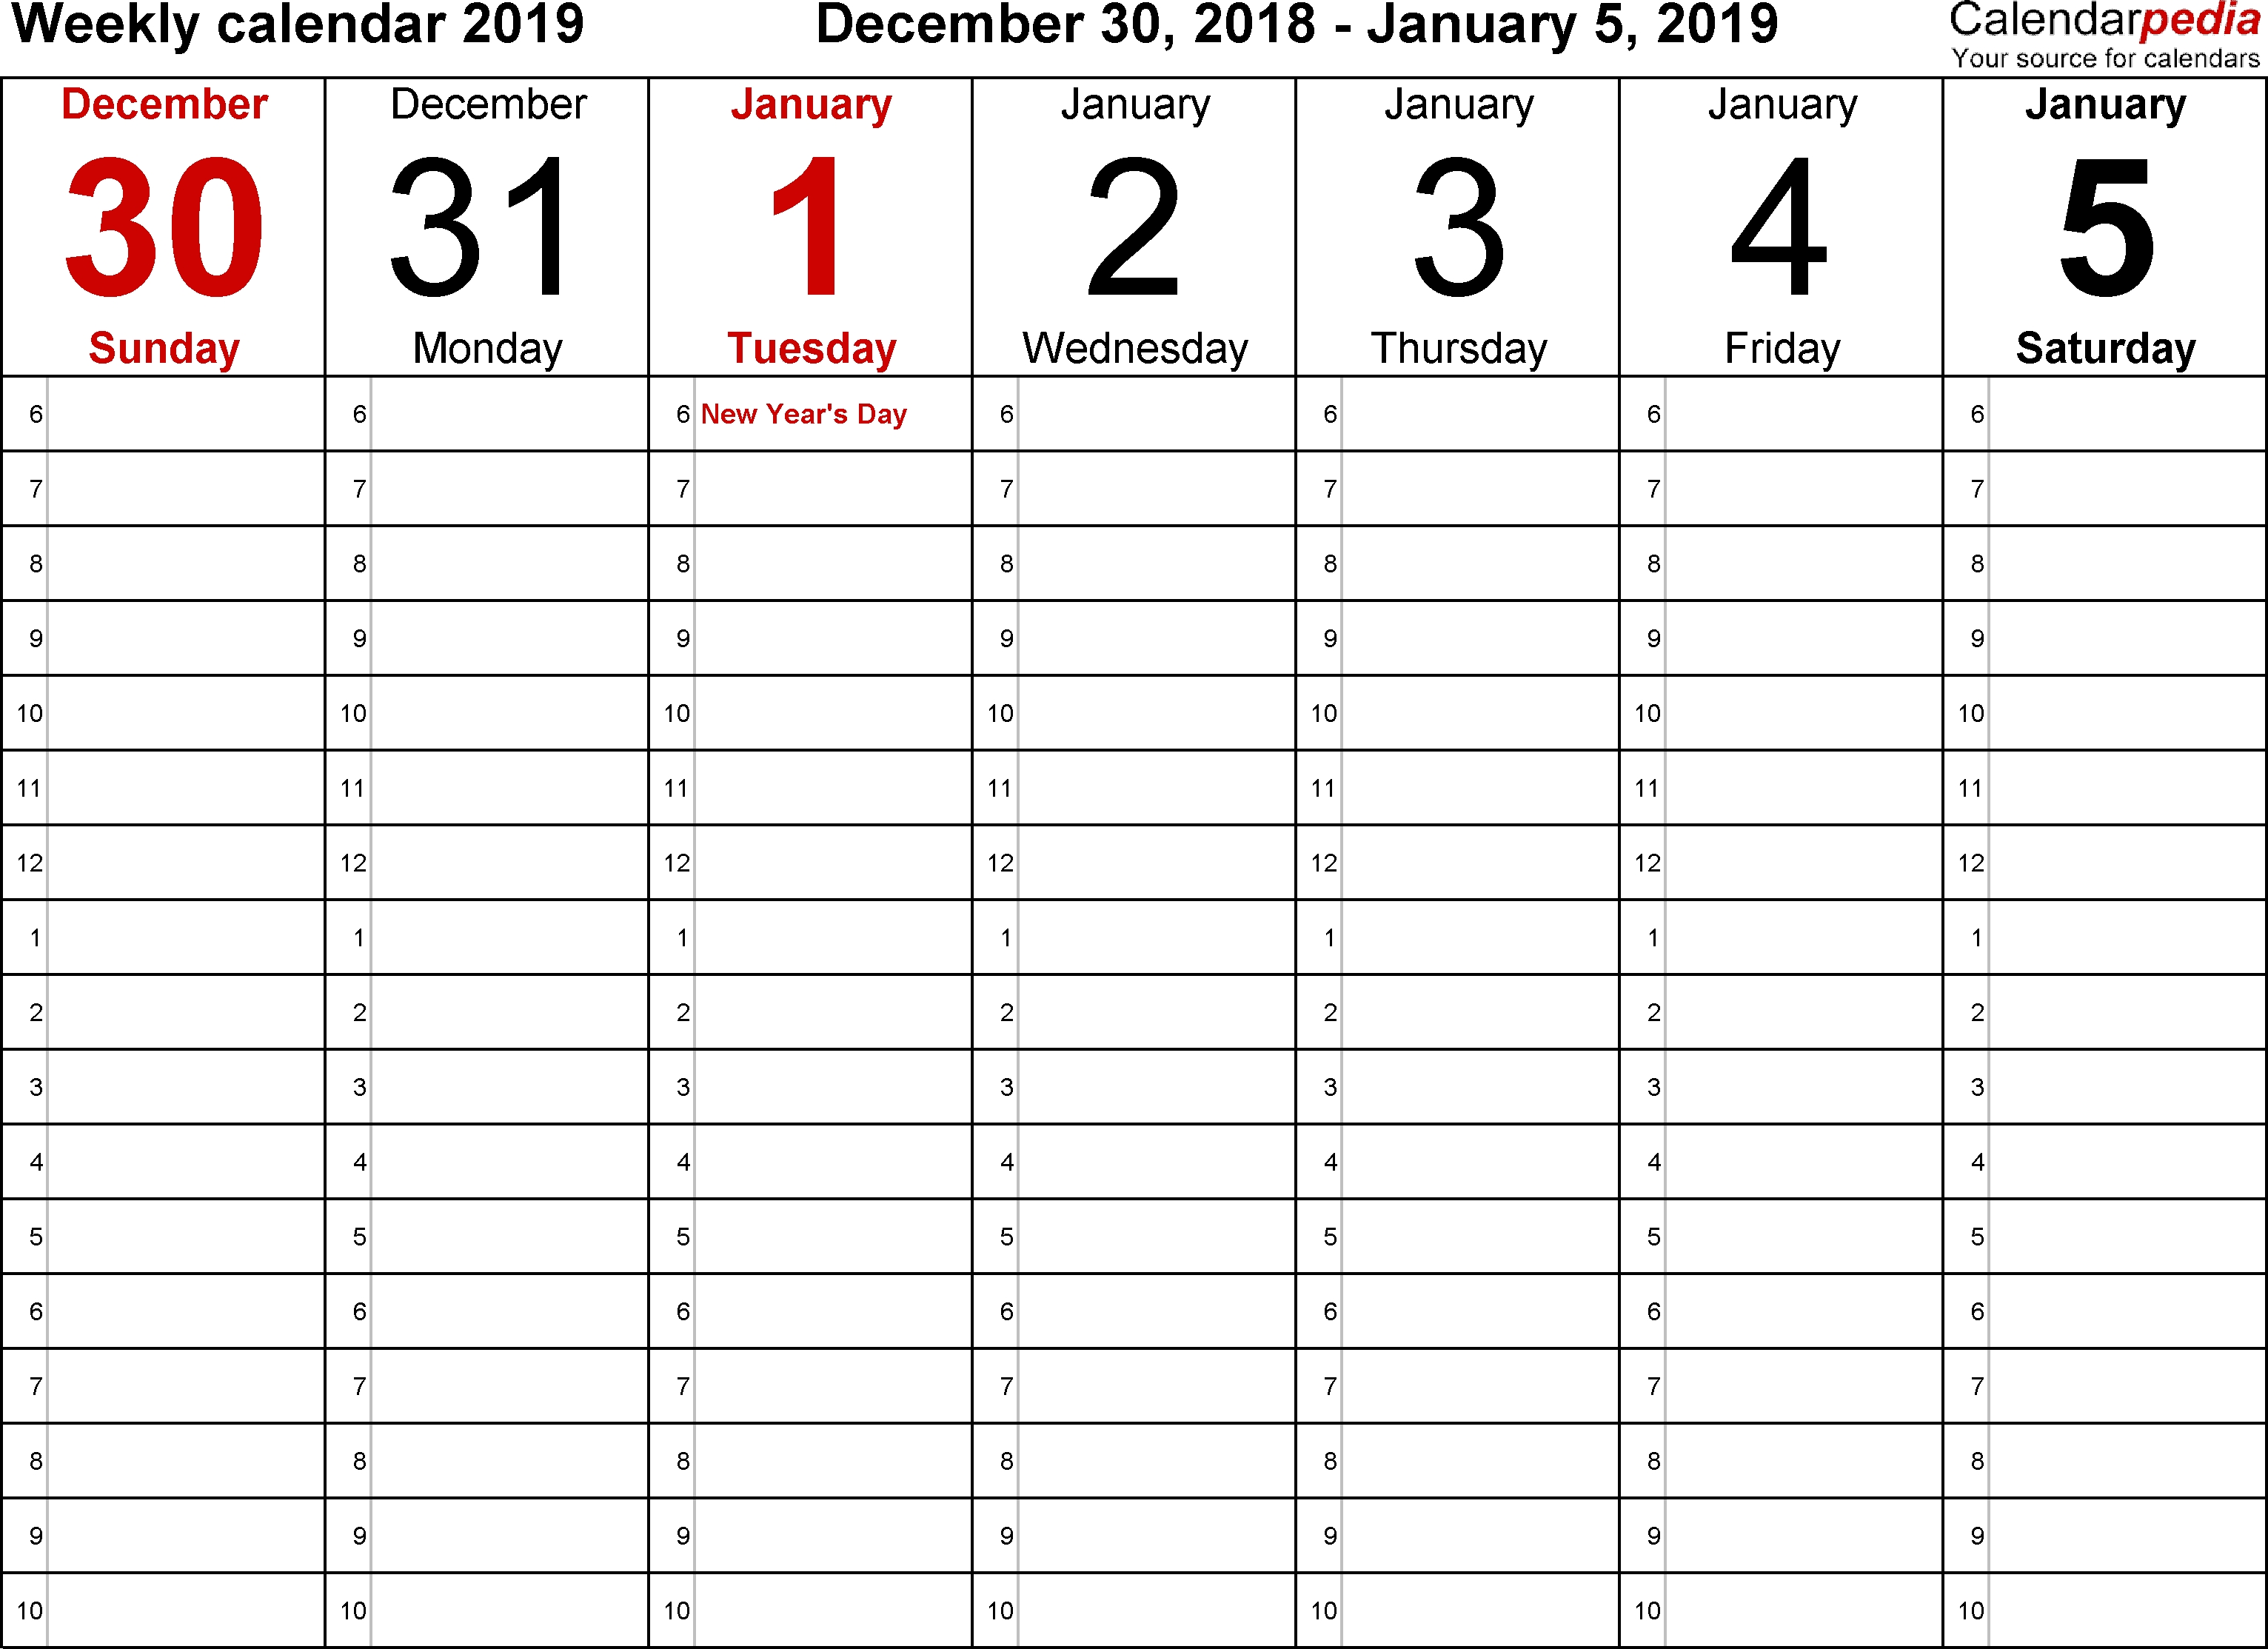 Weekly Calendar 2019 For Word - 12 Free Printable Templates inside Empty Appointment Calendar One Month